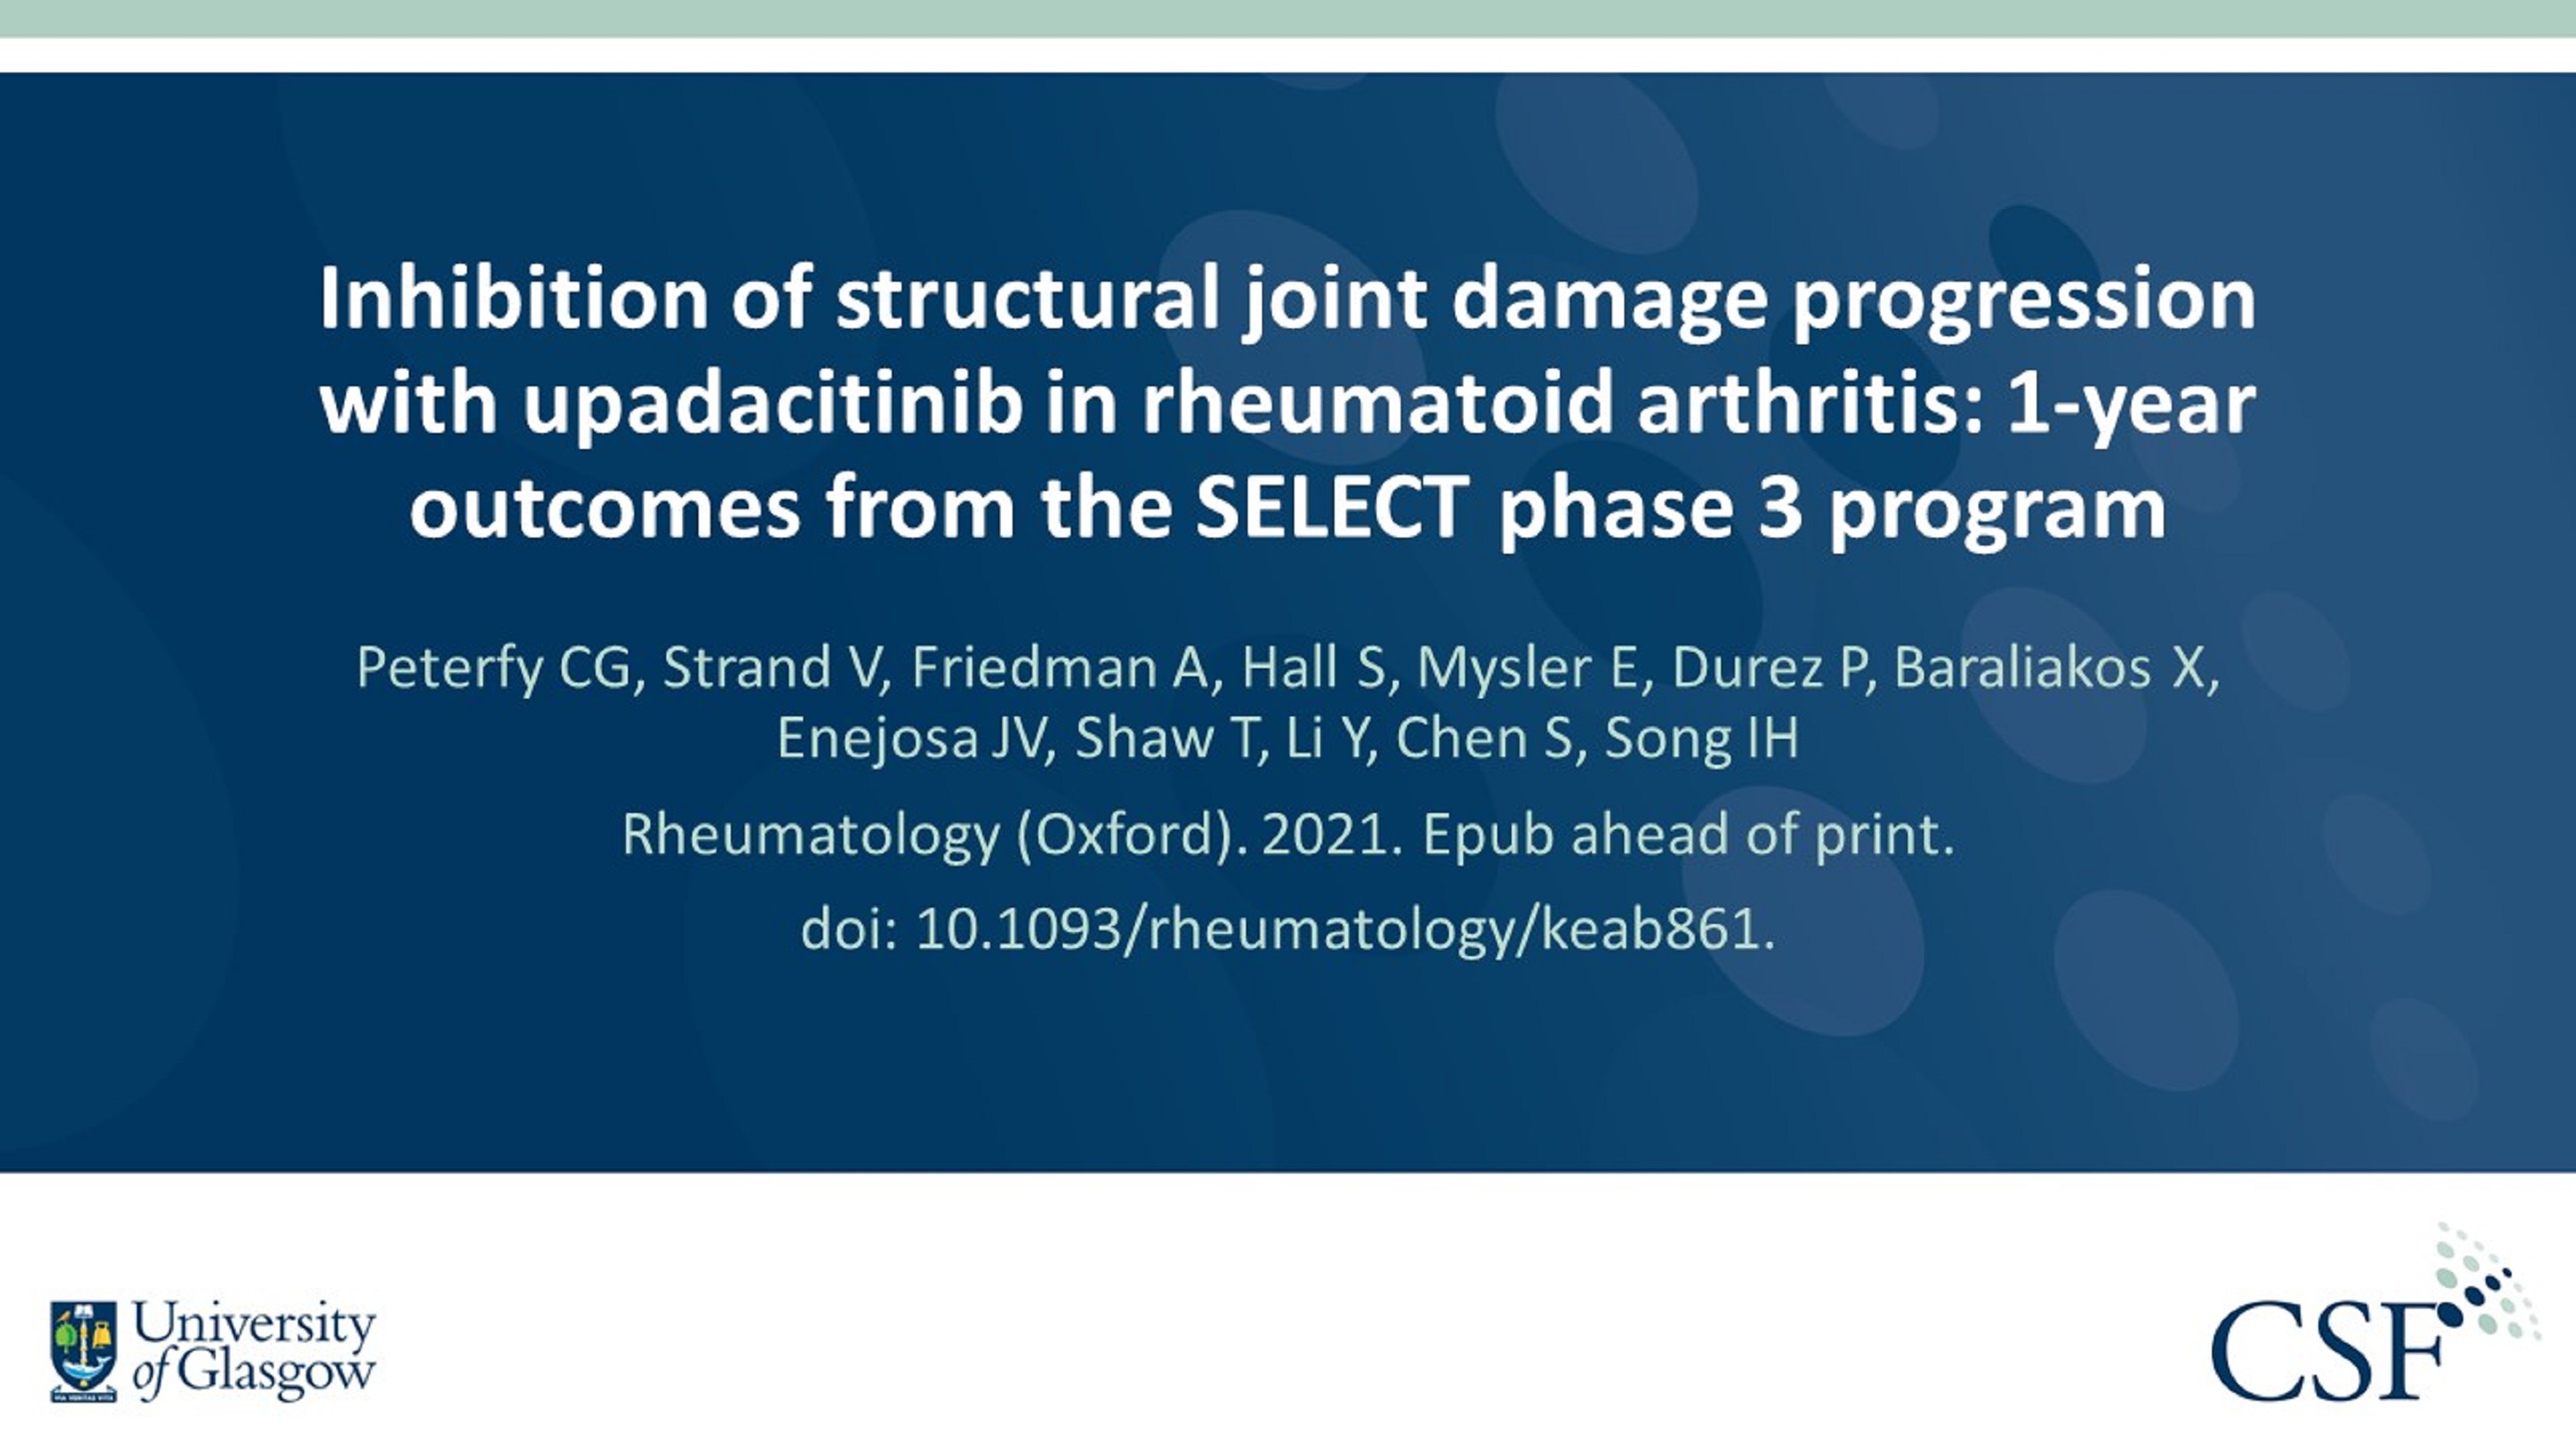 Publication thumbnail: Inhibition of structural joint damage progression with upadacitinib in rheumatoid arthritis: 1-year outcomes from the SELECT phase 3 program